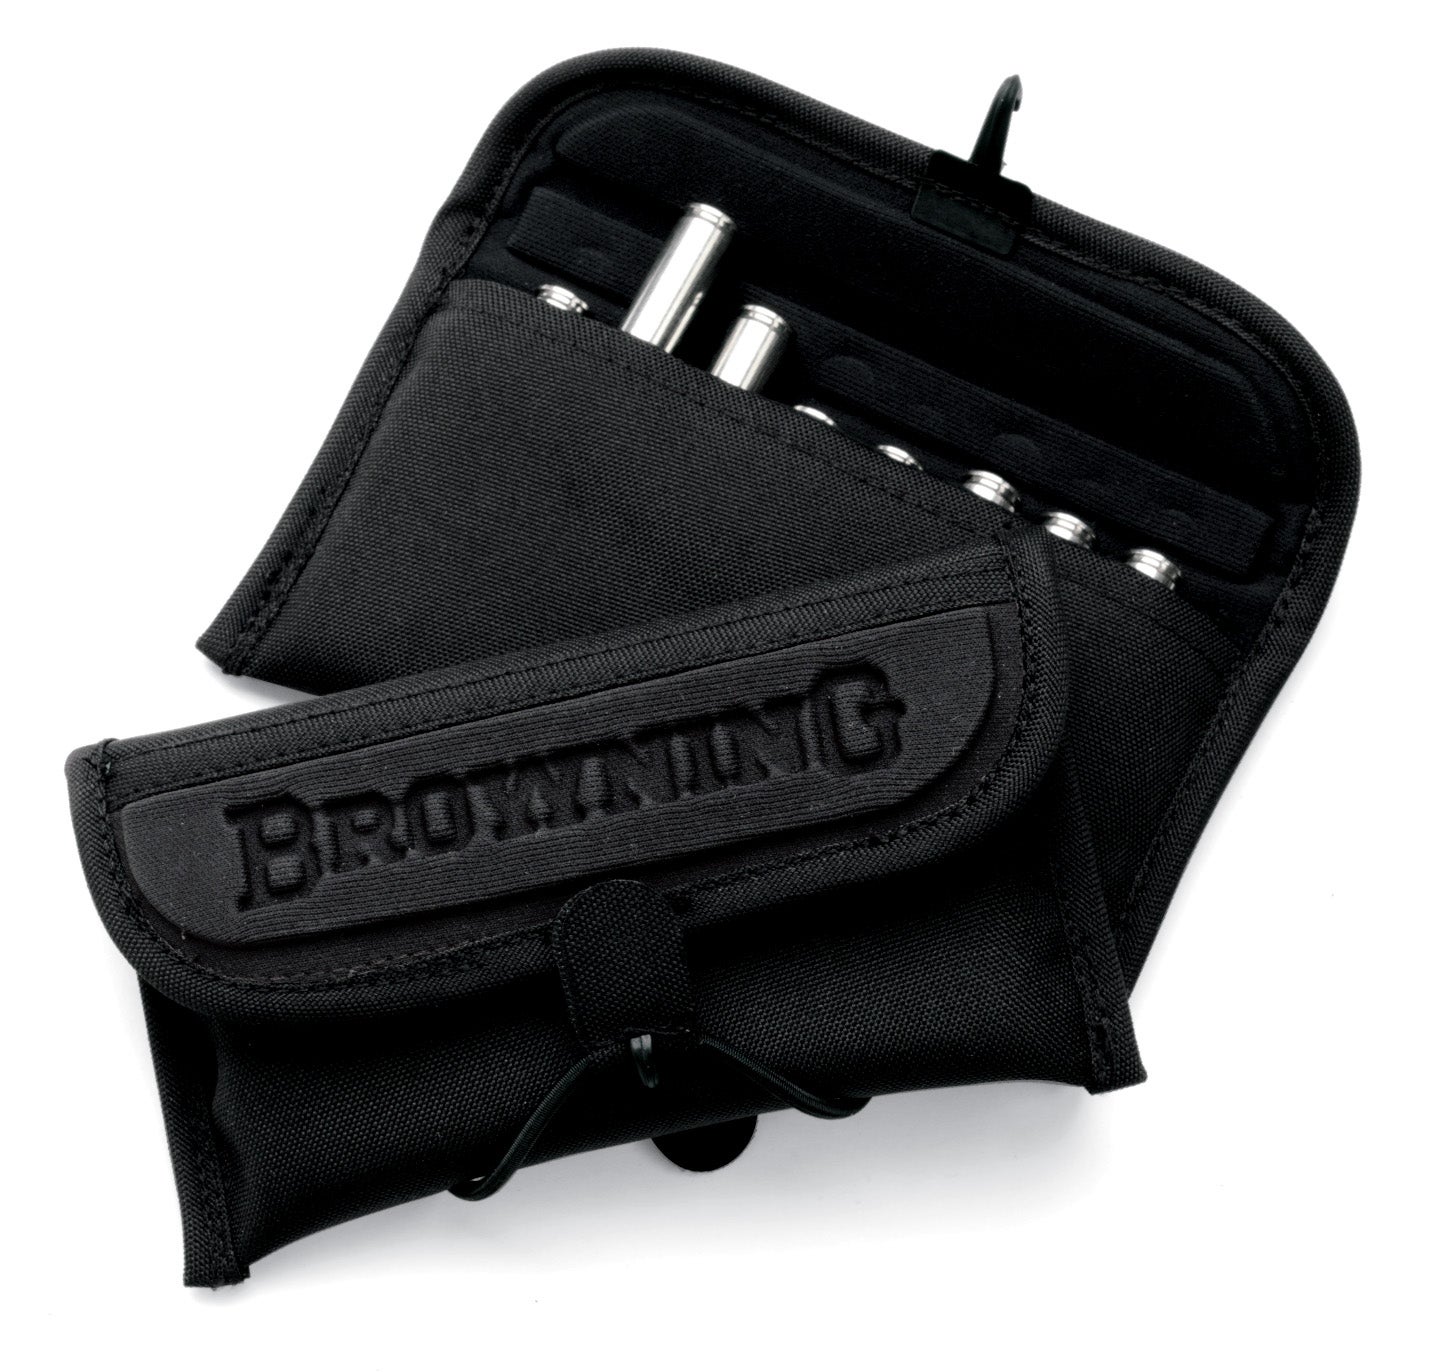 Browning accessories uk